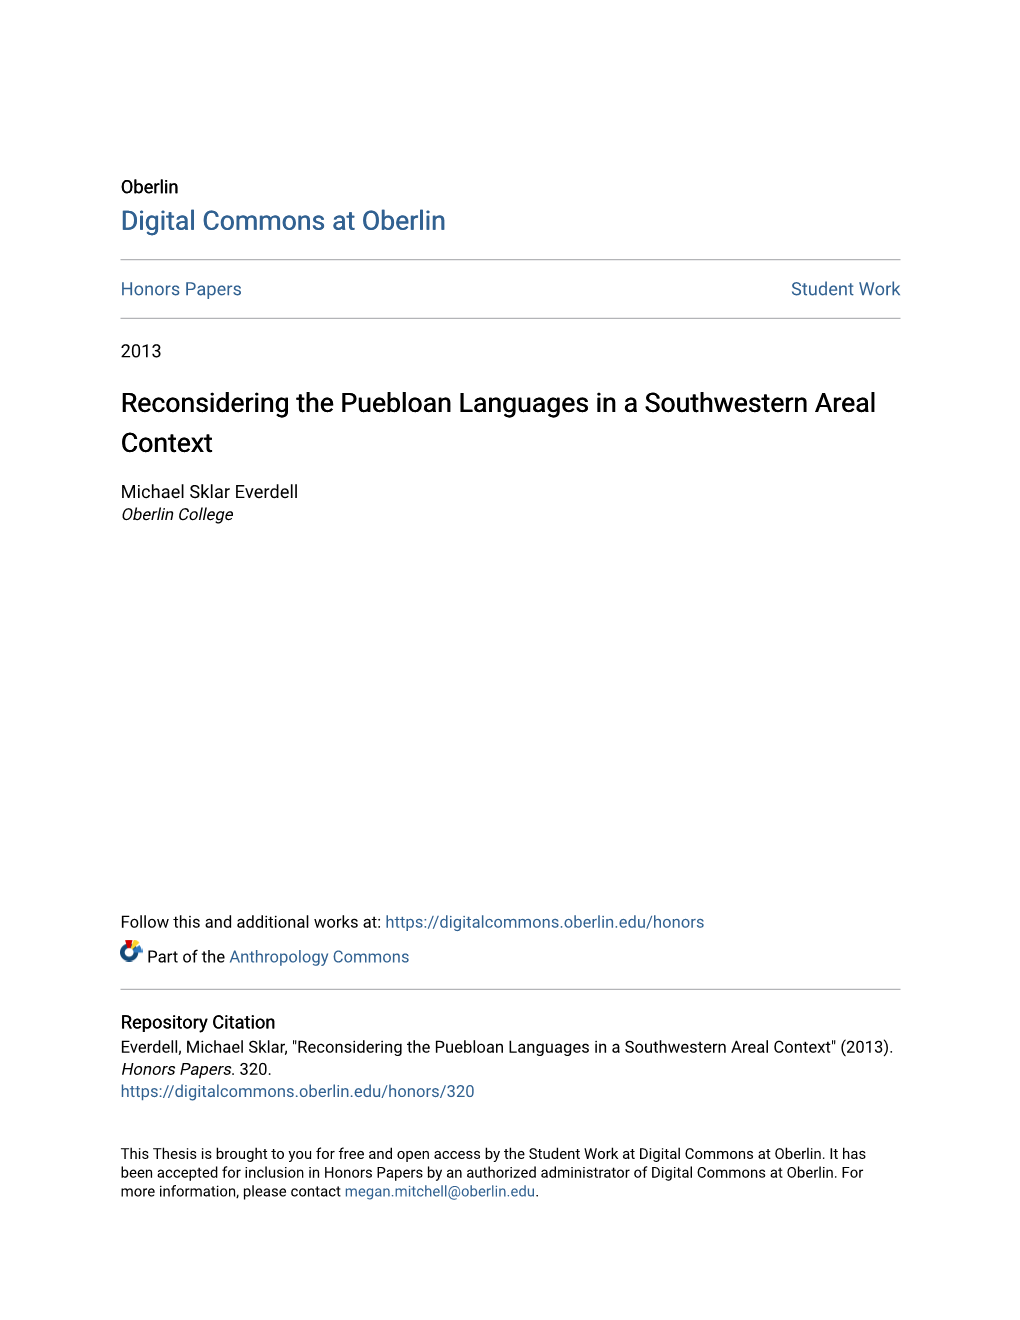 Reconsidering the Puebloan Languages in a Southwestern Areal Context